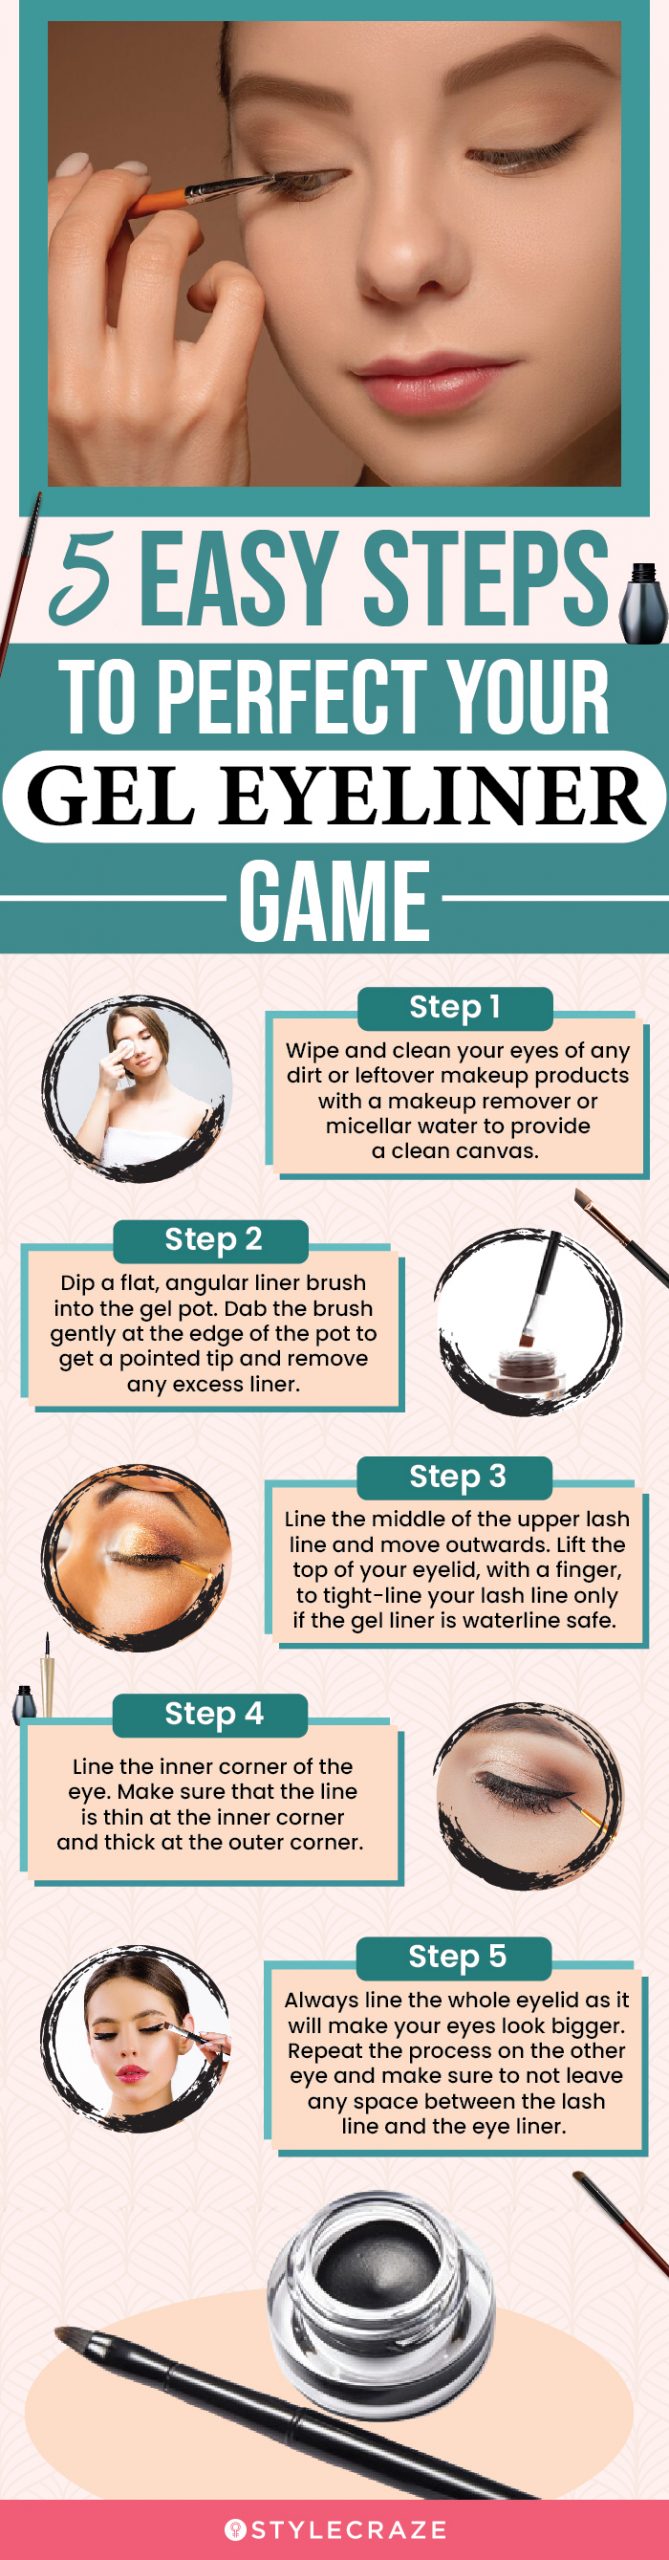 5 easy steps to perfect your gel eyeliner game (infographic)